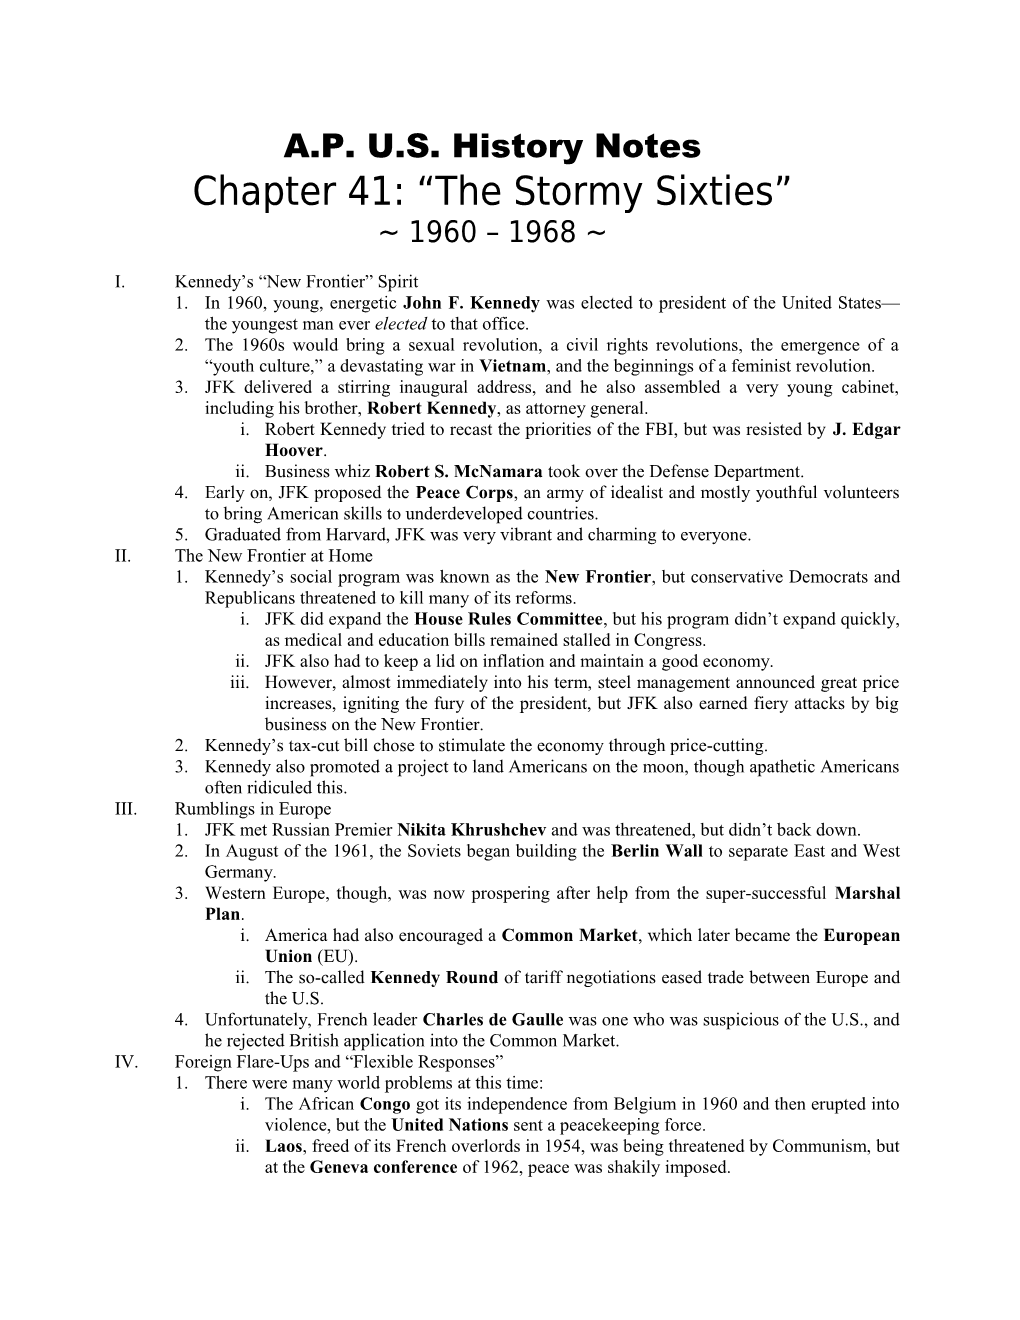 Chapter 41 History Notes